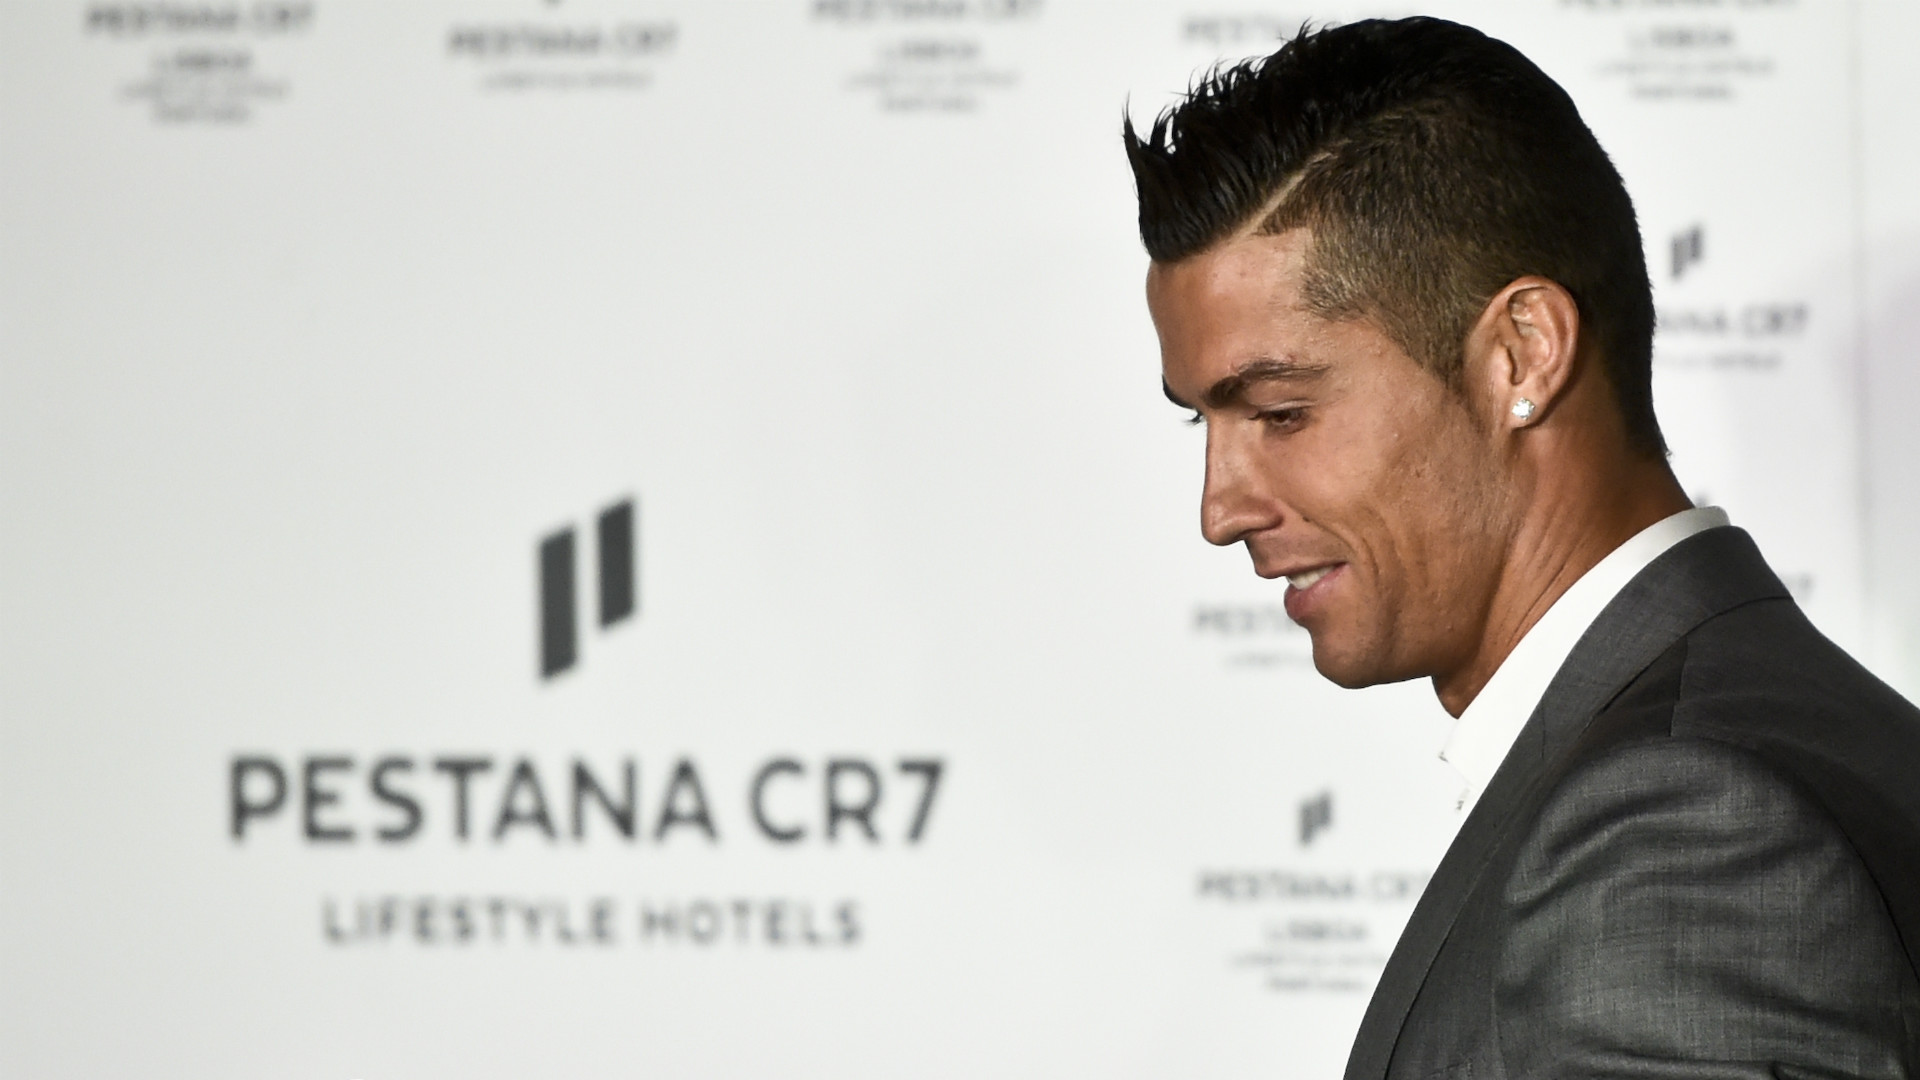 What is Cristiano Ronaldo's net worth and how much does the Juventus